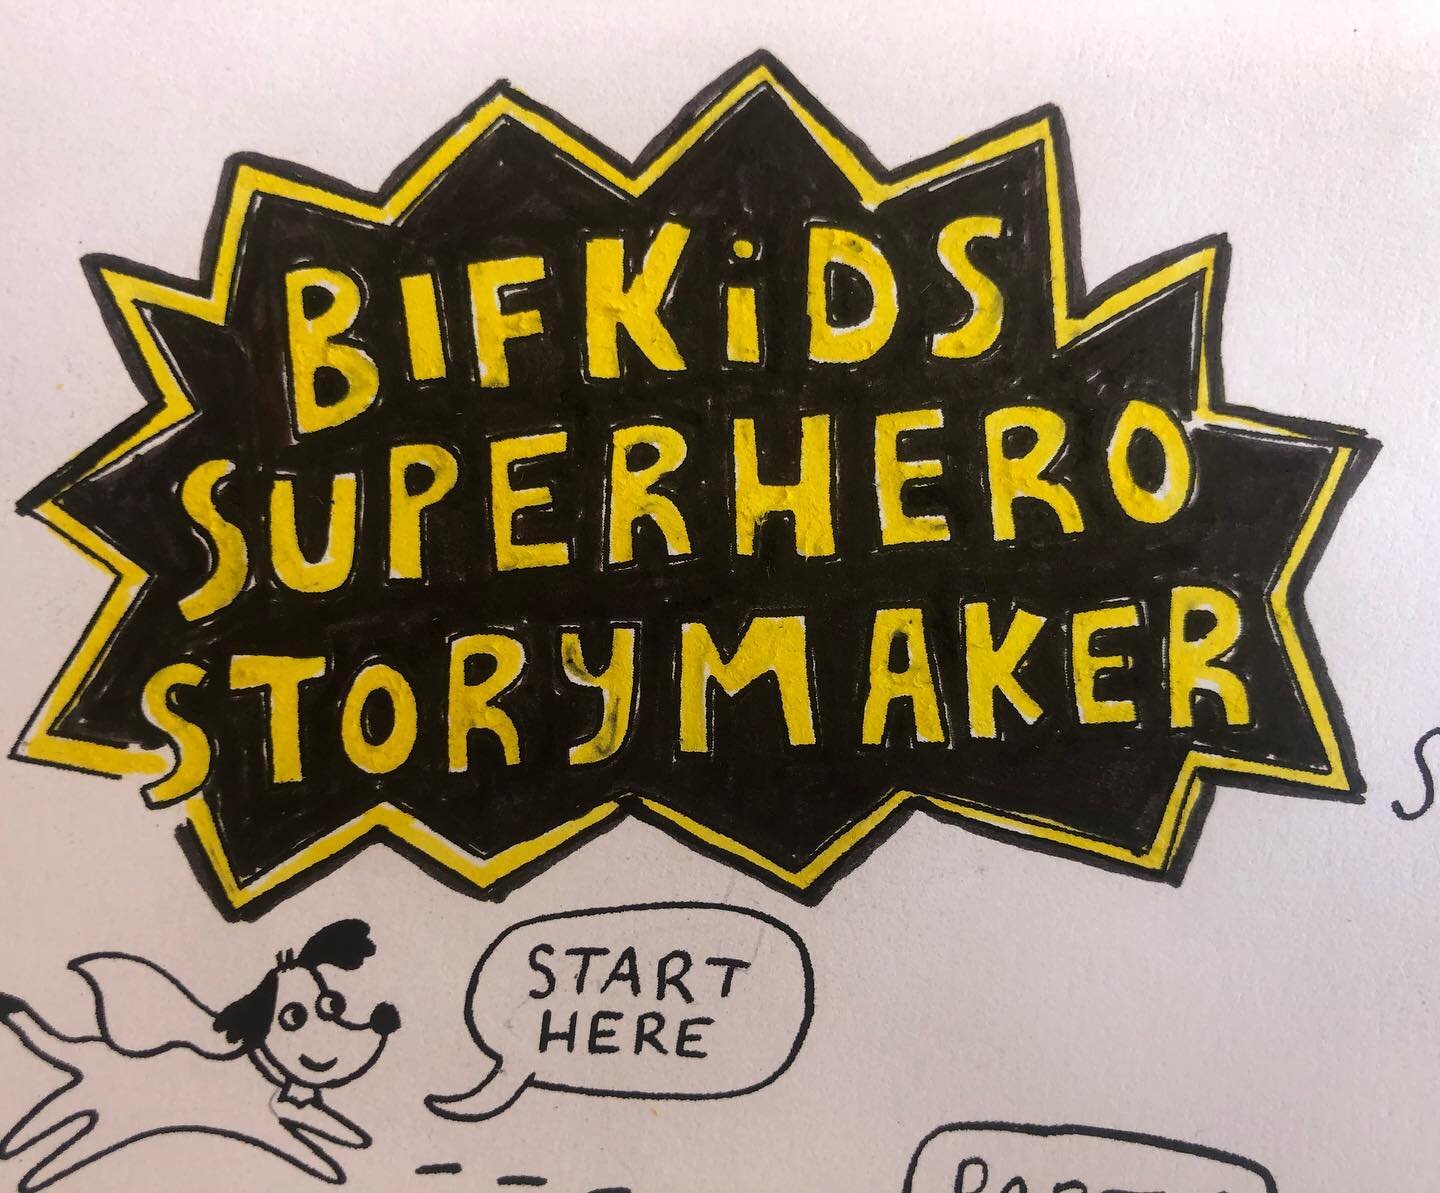 Today&rsquo;s #BIDKiDS session - creating your own superhero story 🤙🏽 💡 💡 💡 👏👏👏 #creative #ideas #kids #superhero #problemsolving